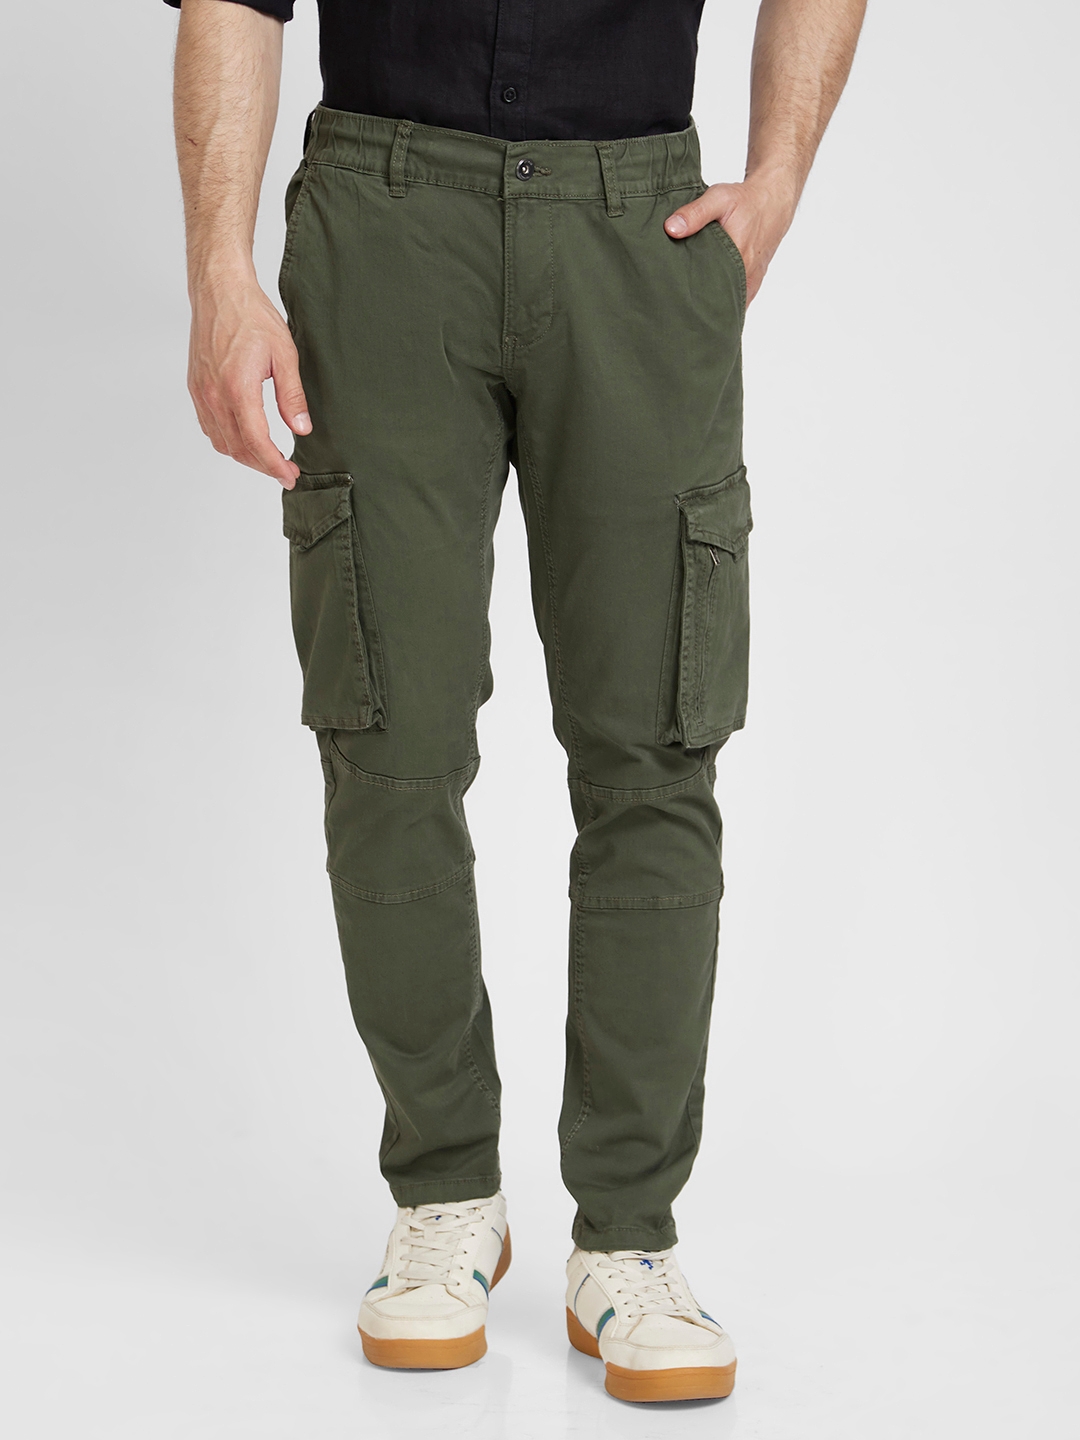 Lee Wyoming Mens Relaxed Fit Cargo Pant - JCPenney